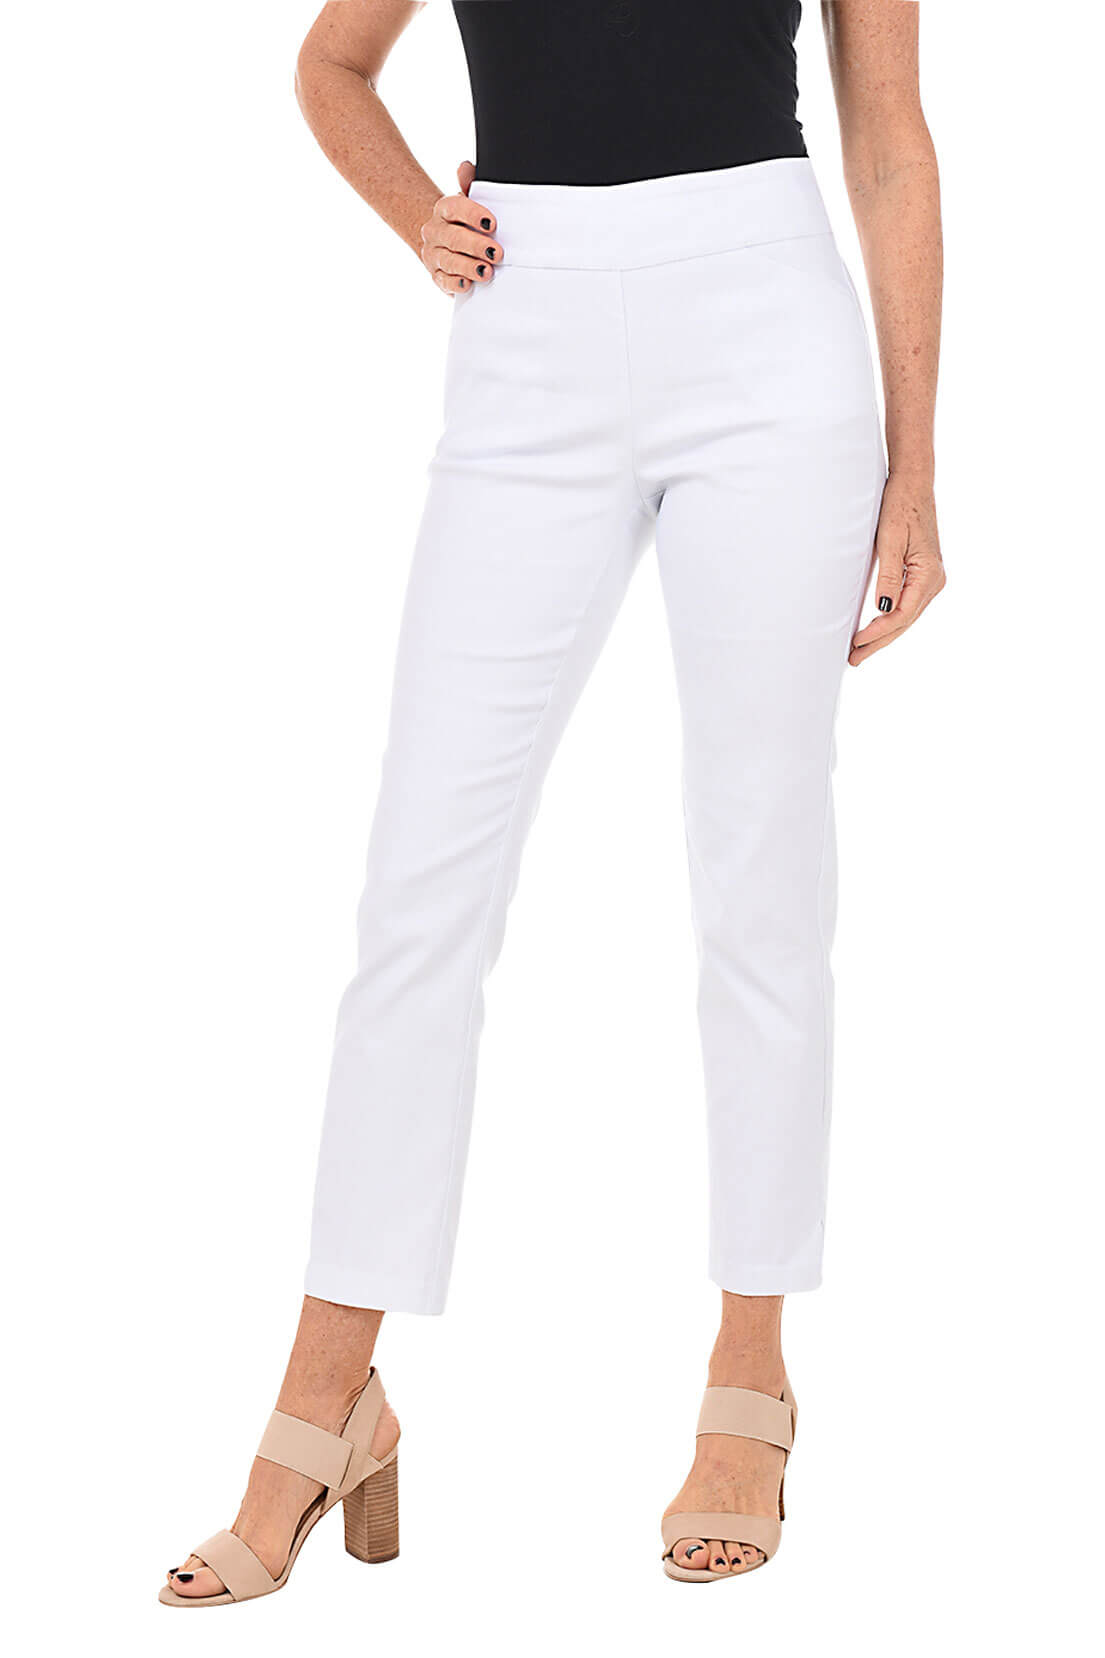 The Classic Simone Pant for Women